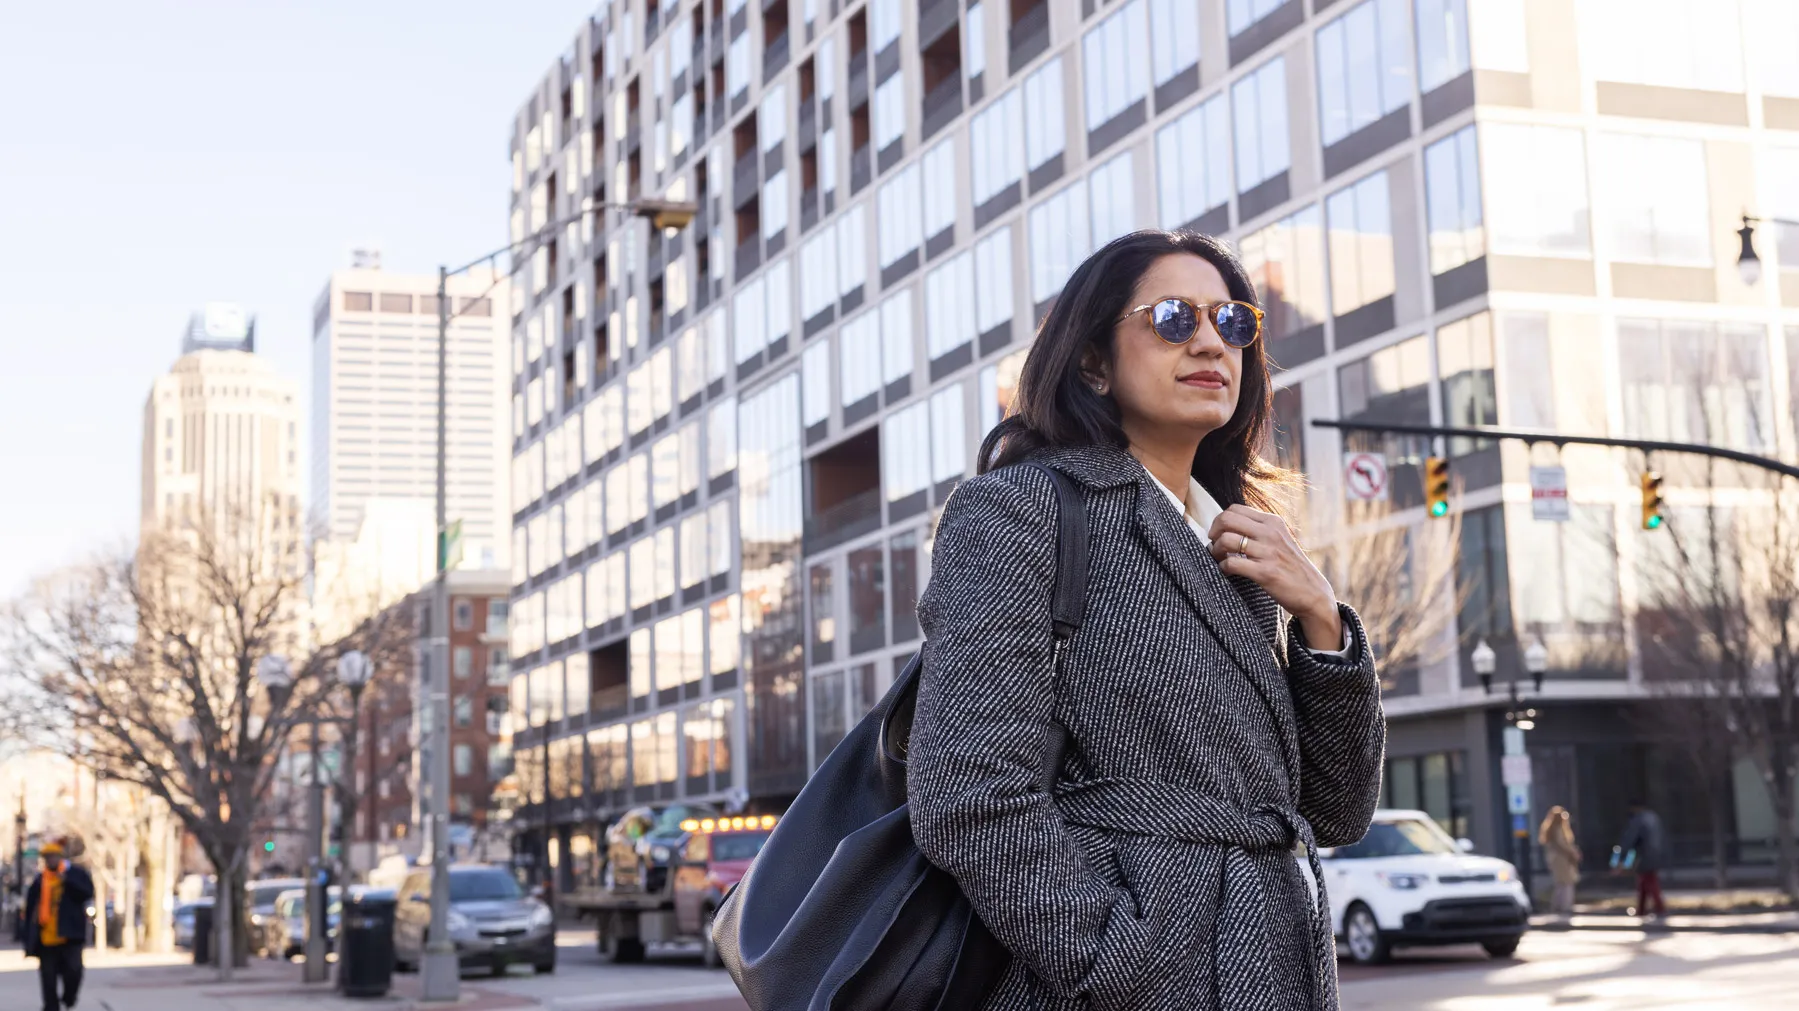 Waiting to cross a street in downtown Columbus, Bhakti Bania looks stylish and purposeful in round sunglasses and a chic coat. A skyscraper with shiny silver-tinted windows rises behind her.